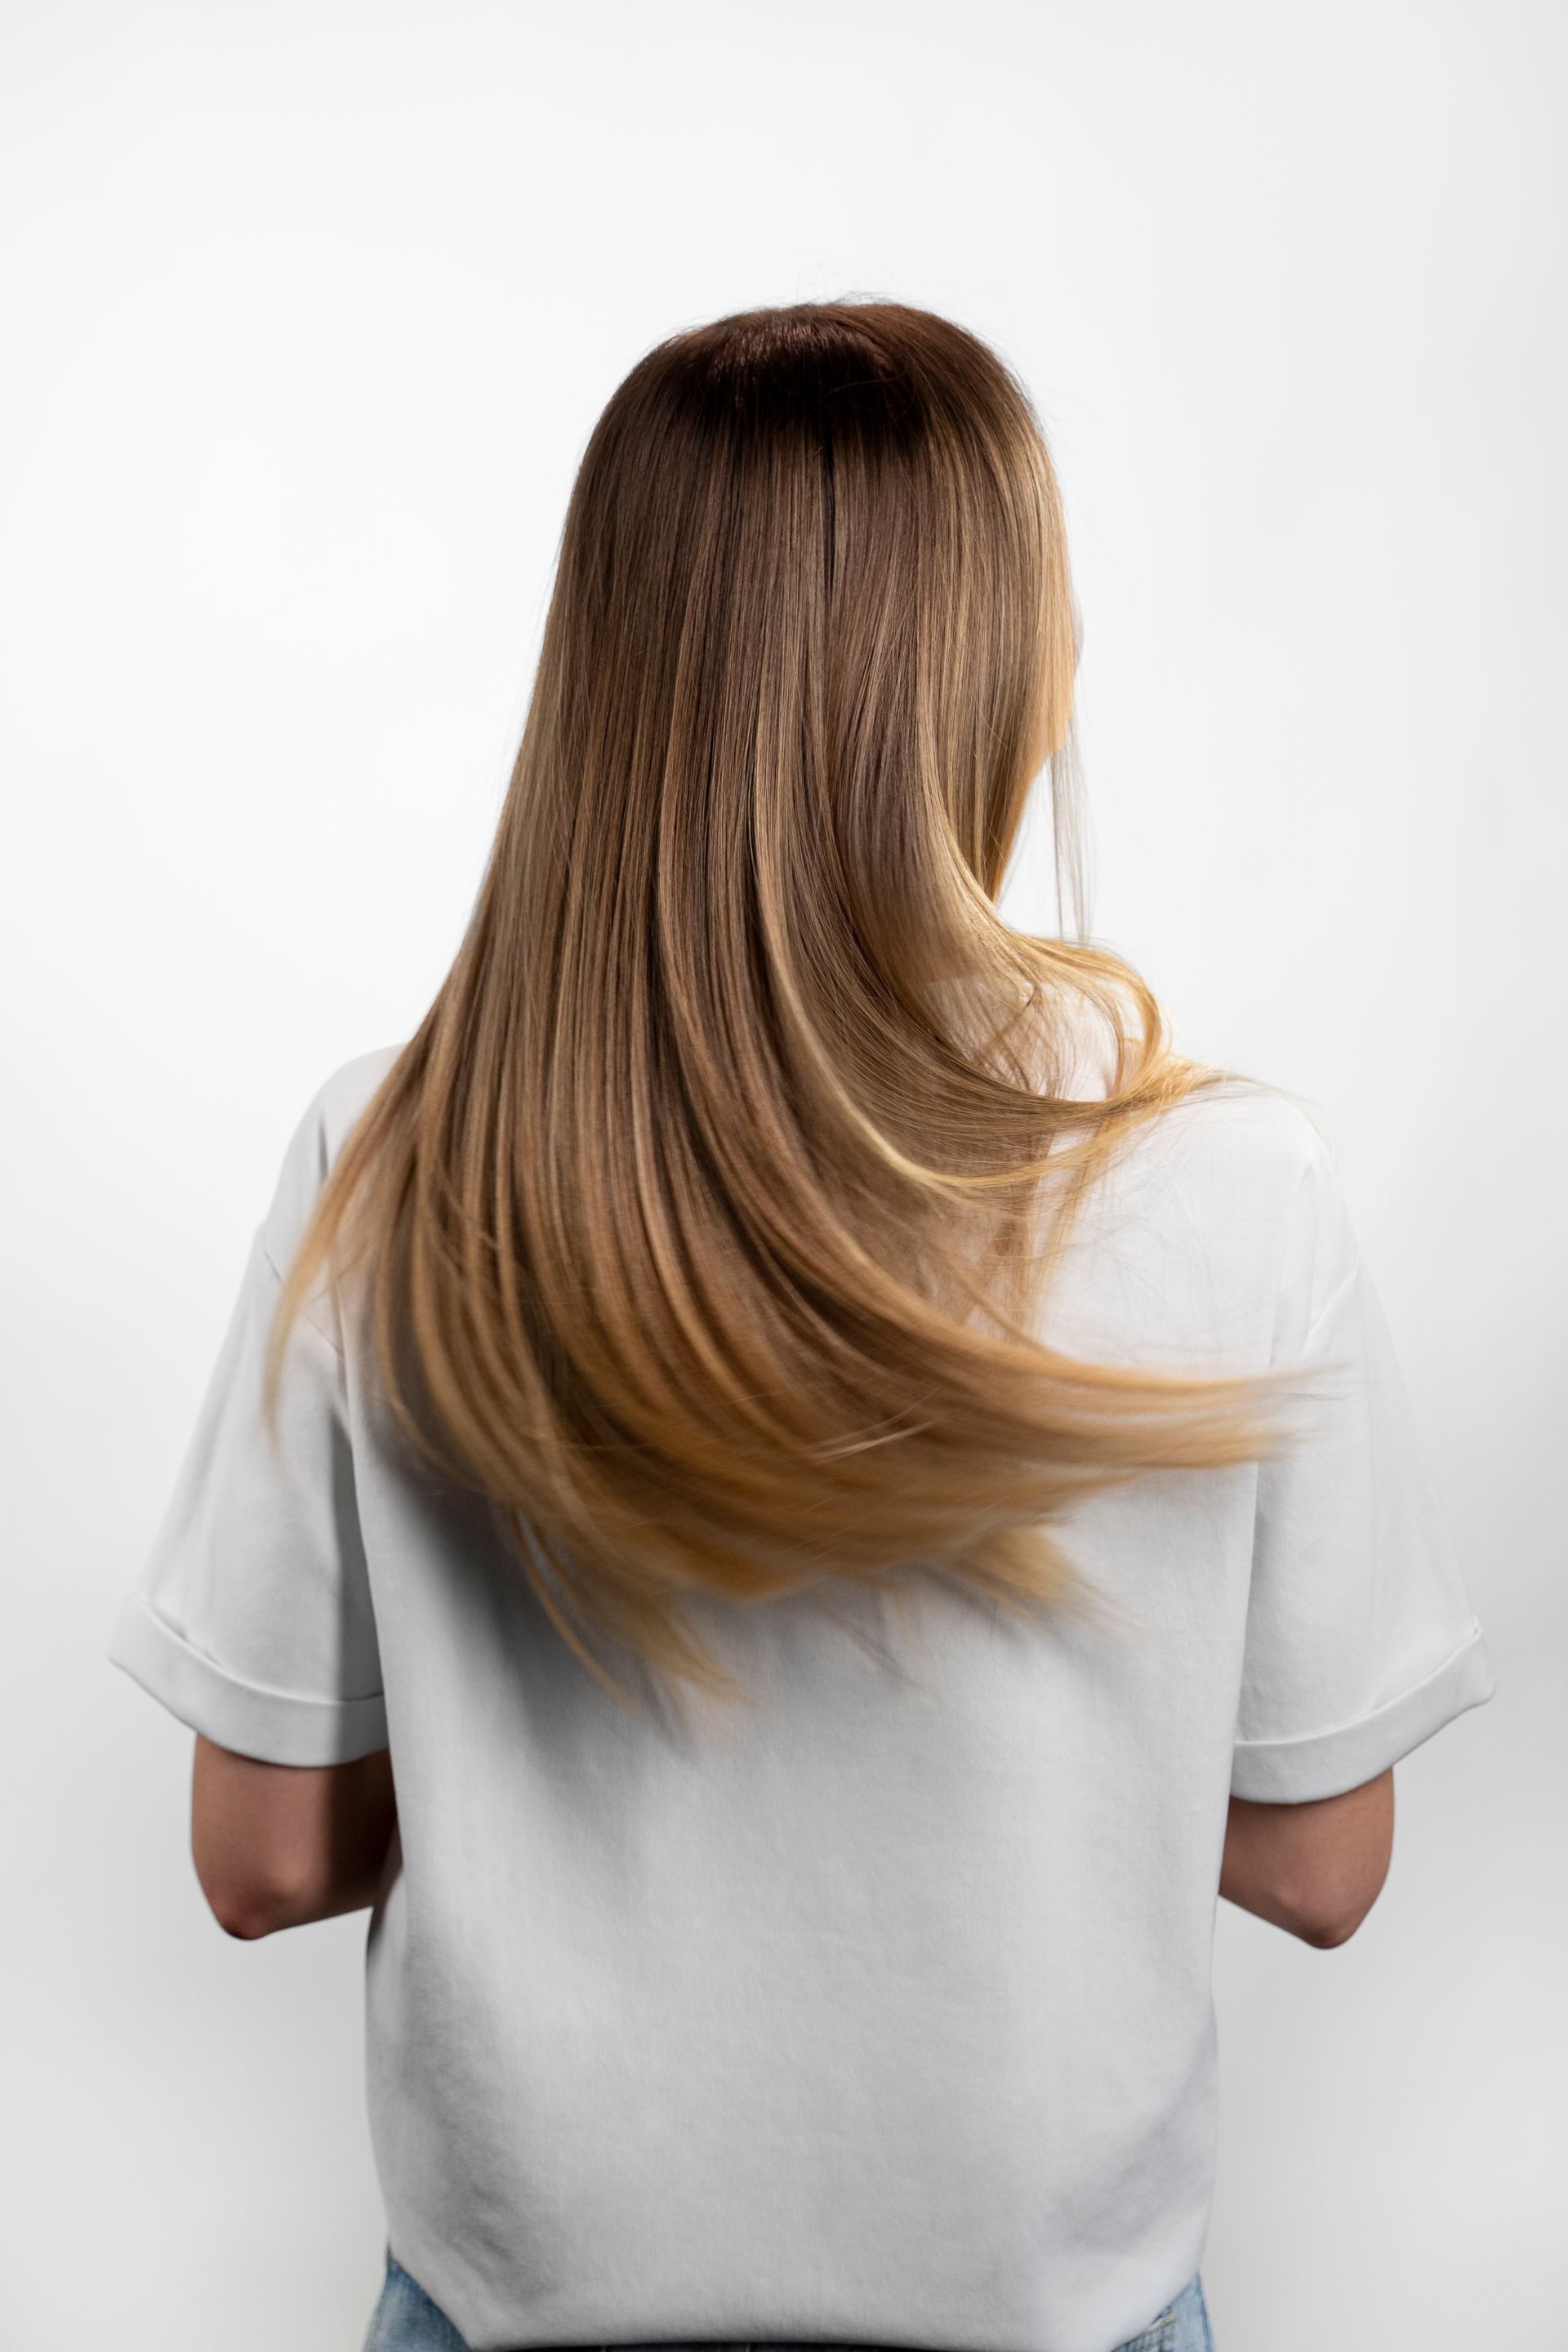 the back of a woman with long hair wearing a white shirt .